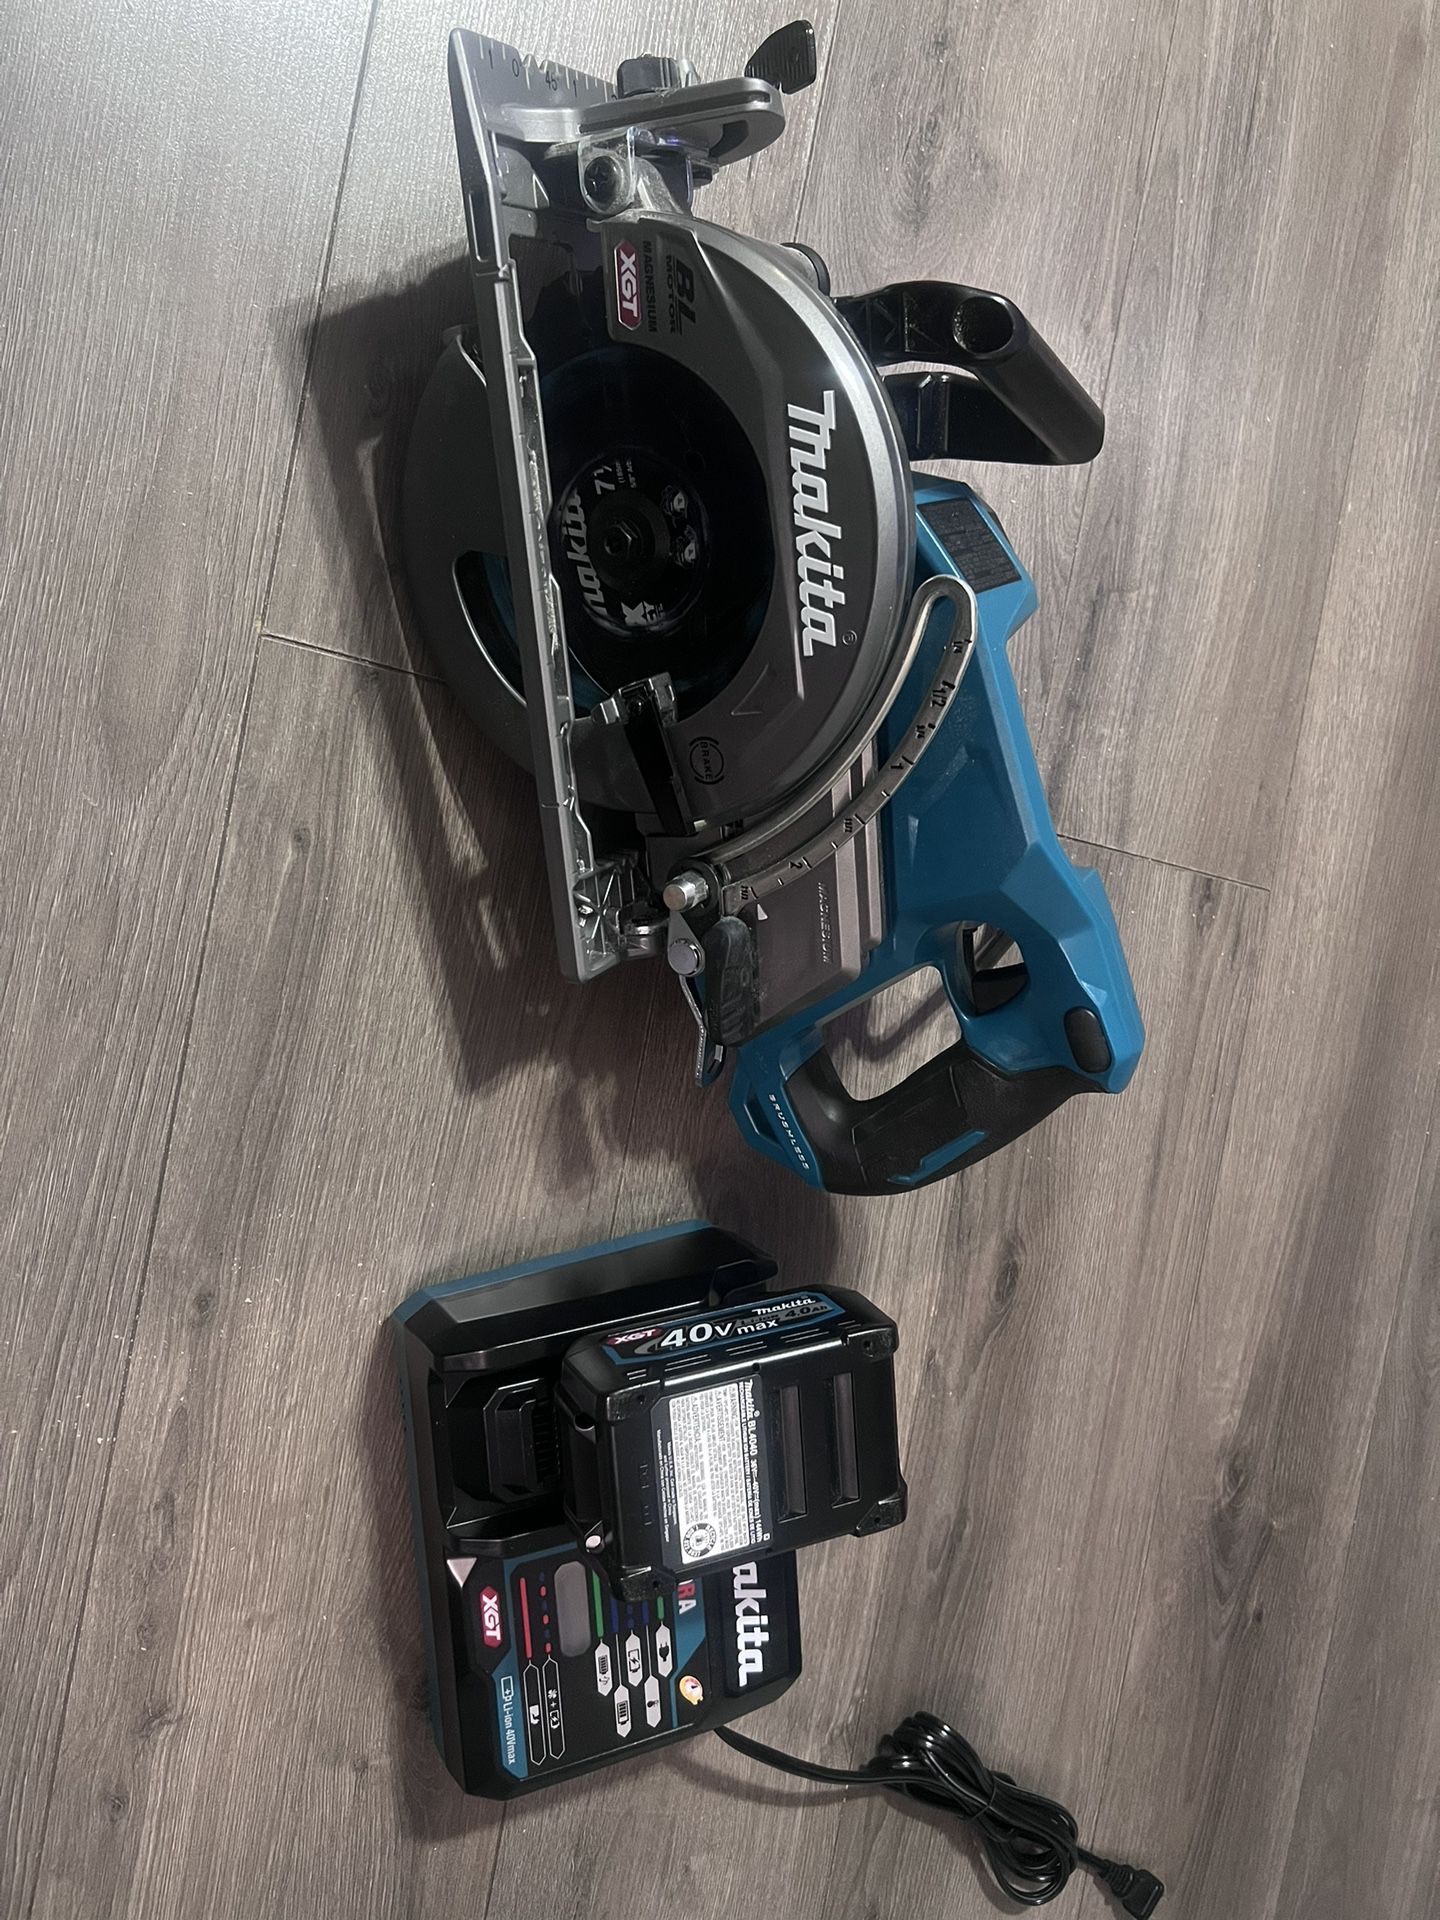 Used Like New Makita 40V Read handle 7- 1/4 circular saw with battery and charger